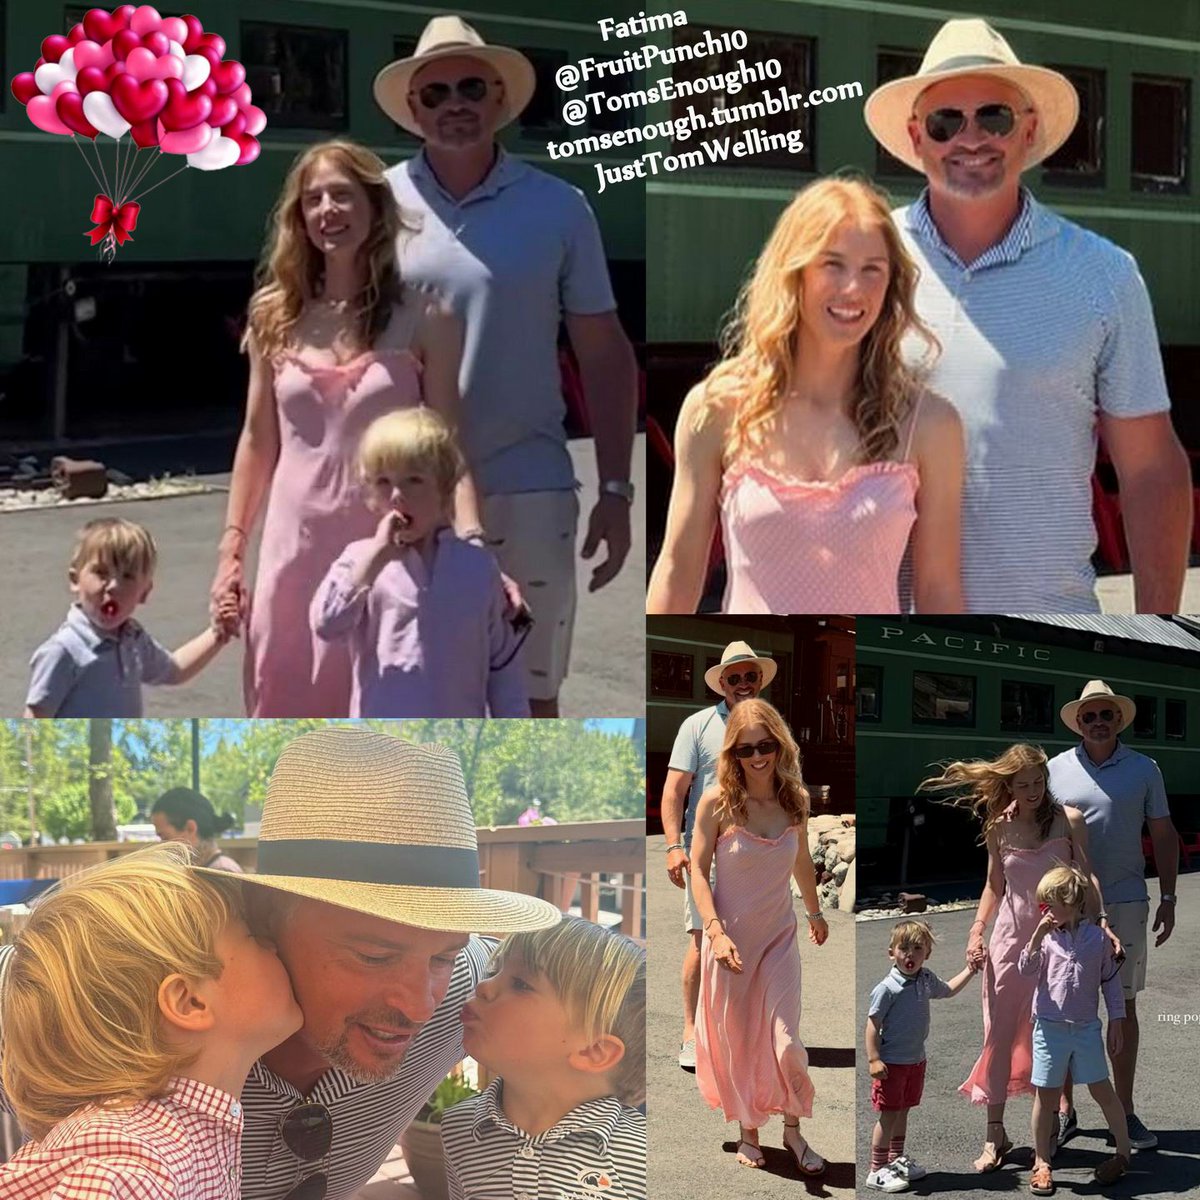 Jessica Rose Lee Welling, I hope you fully enjoyed the special day with Thomson, Rocklin & Tom Welling! You and your lovely family are beautiful and loving all the pretty colors! Love, Fatima - #TomWelling #JessicaRoseWelling #ThomsonWyldeWelling 
#RocklinVonWelling #Smallville